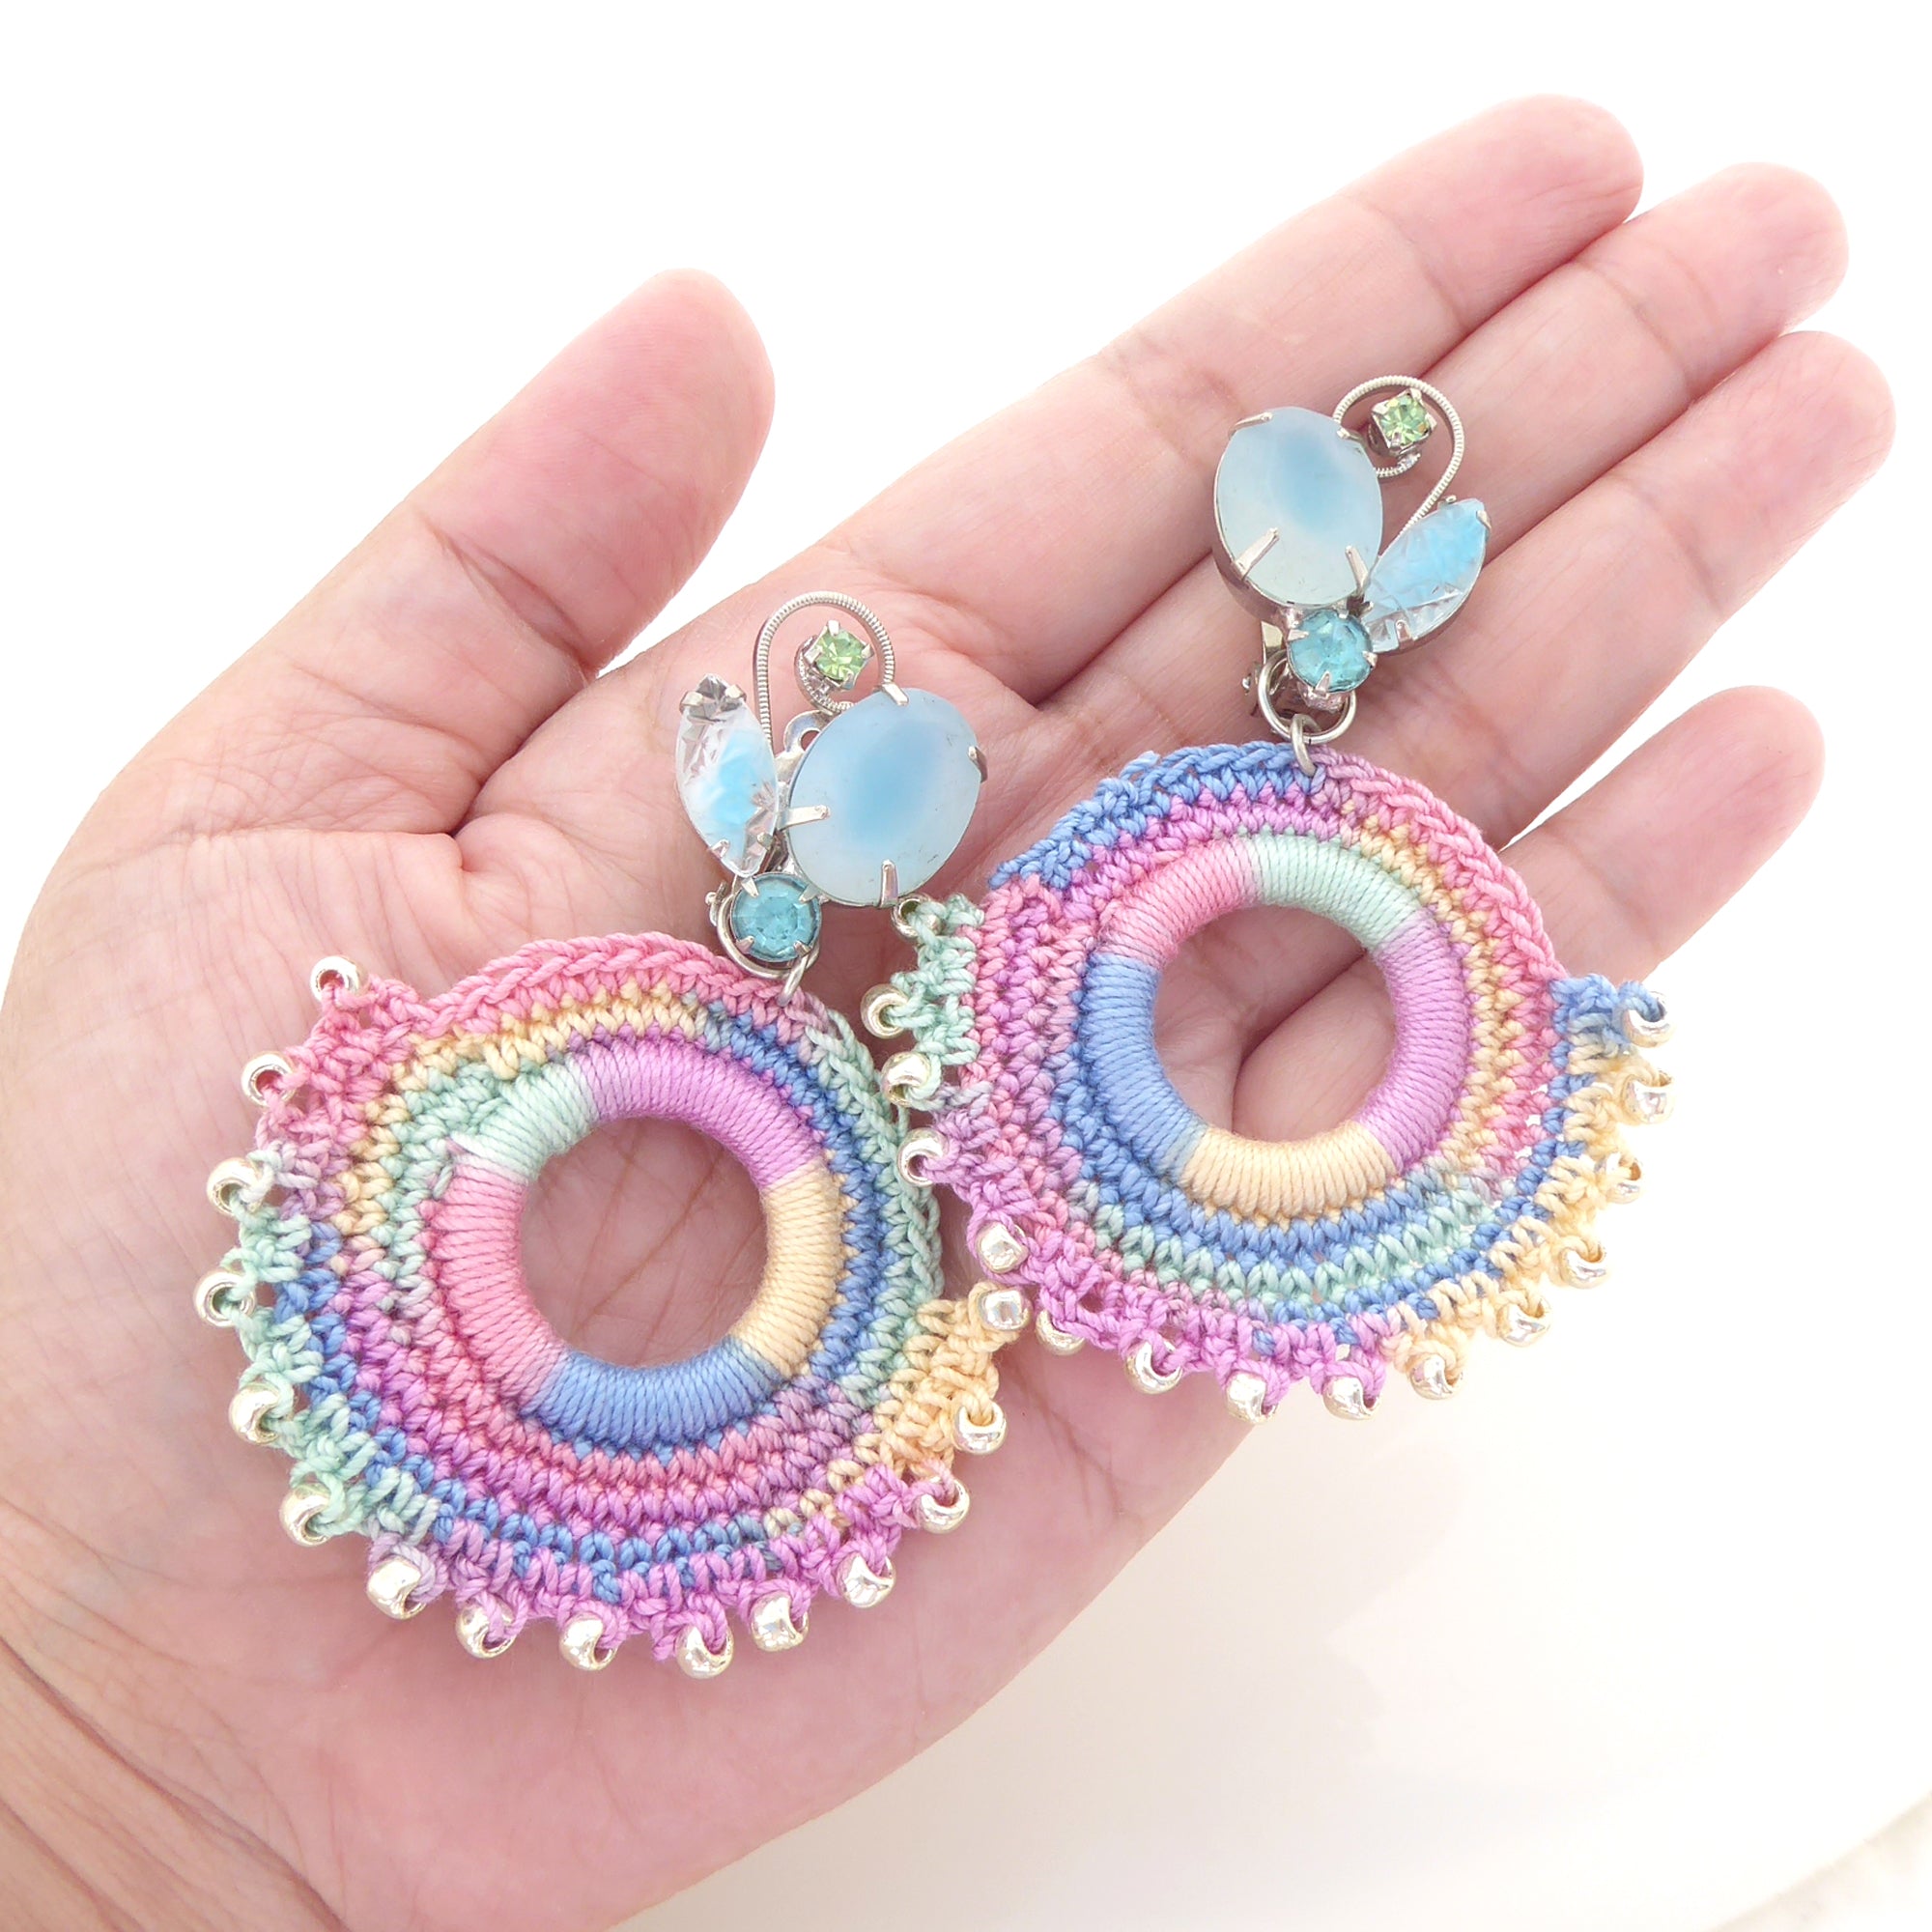 1950s light blue rhinestone and pastel crochet earrings by Jenny Dayco 7